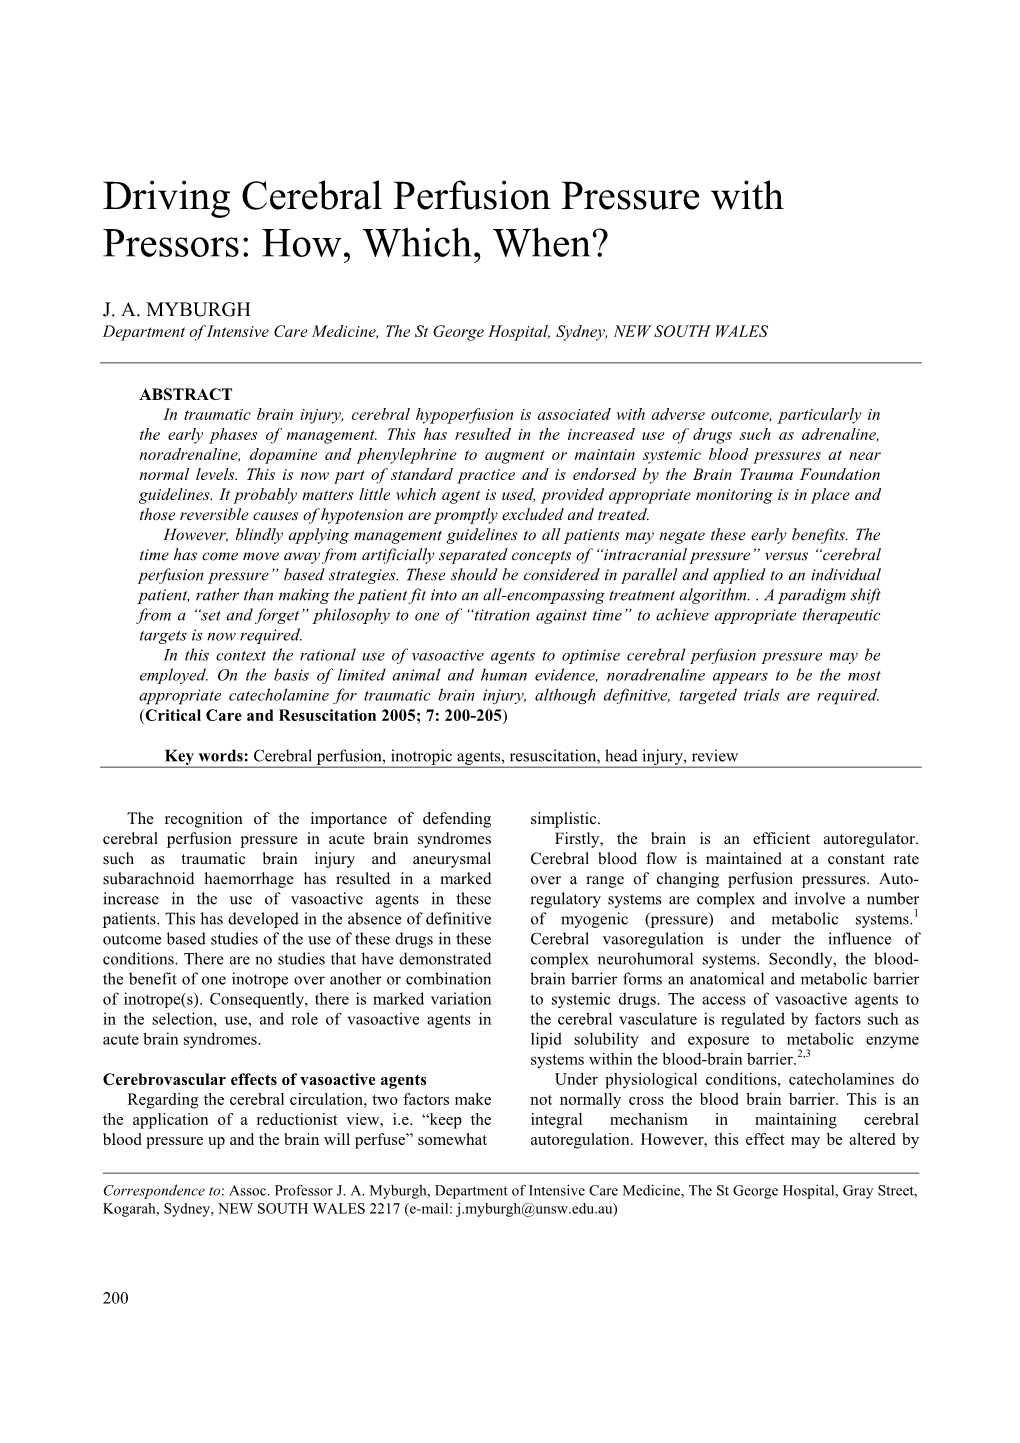 Driving Cerebral Perfusion Pressure with Pressors: How, Which, When?